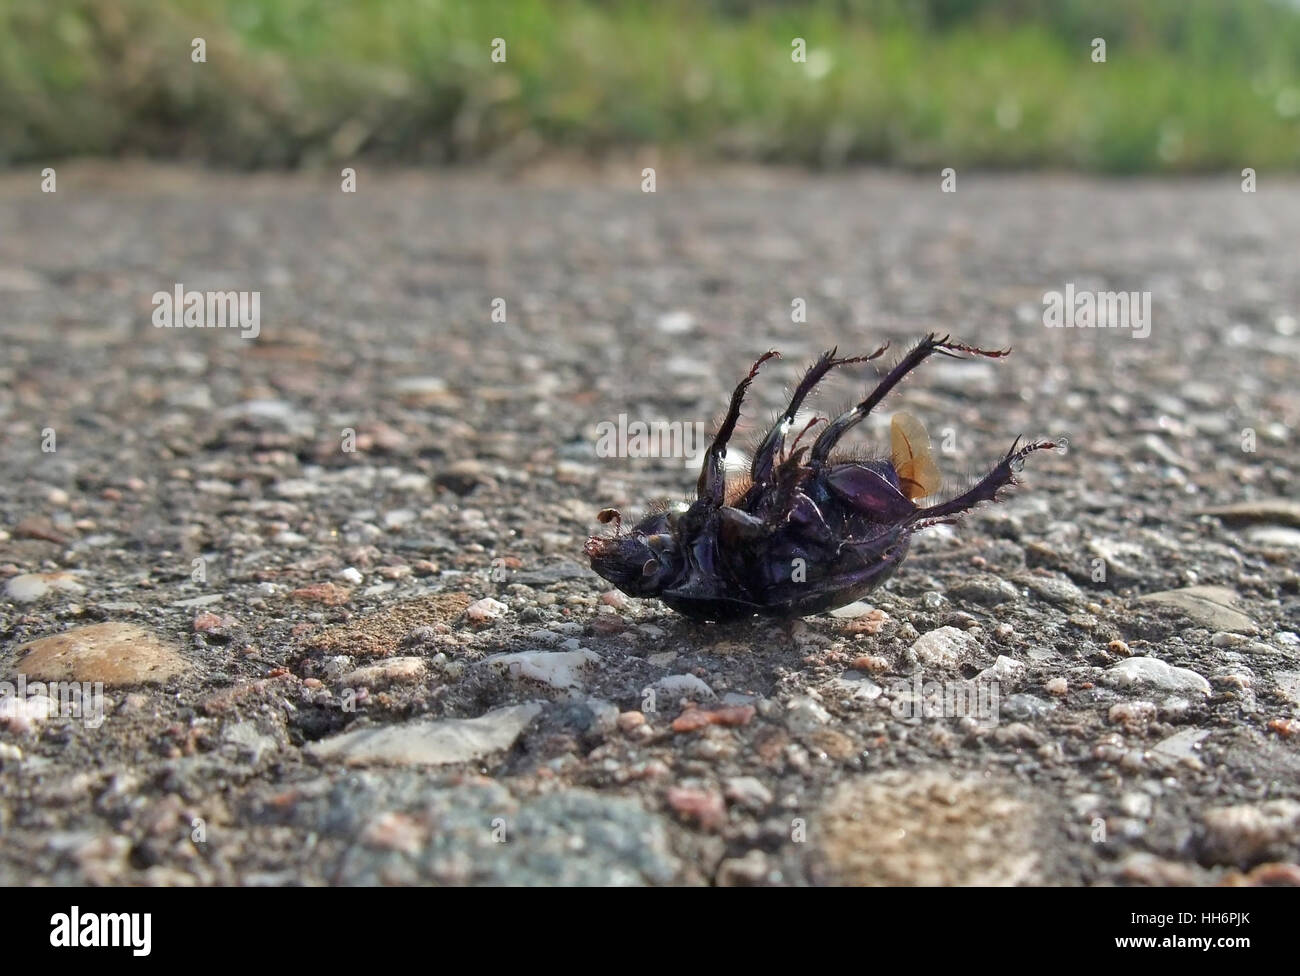 closeup showing a dead bug named 'Cysolina sturmi' supine on pavement in sunny ambiance Stock Photo